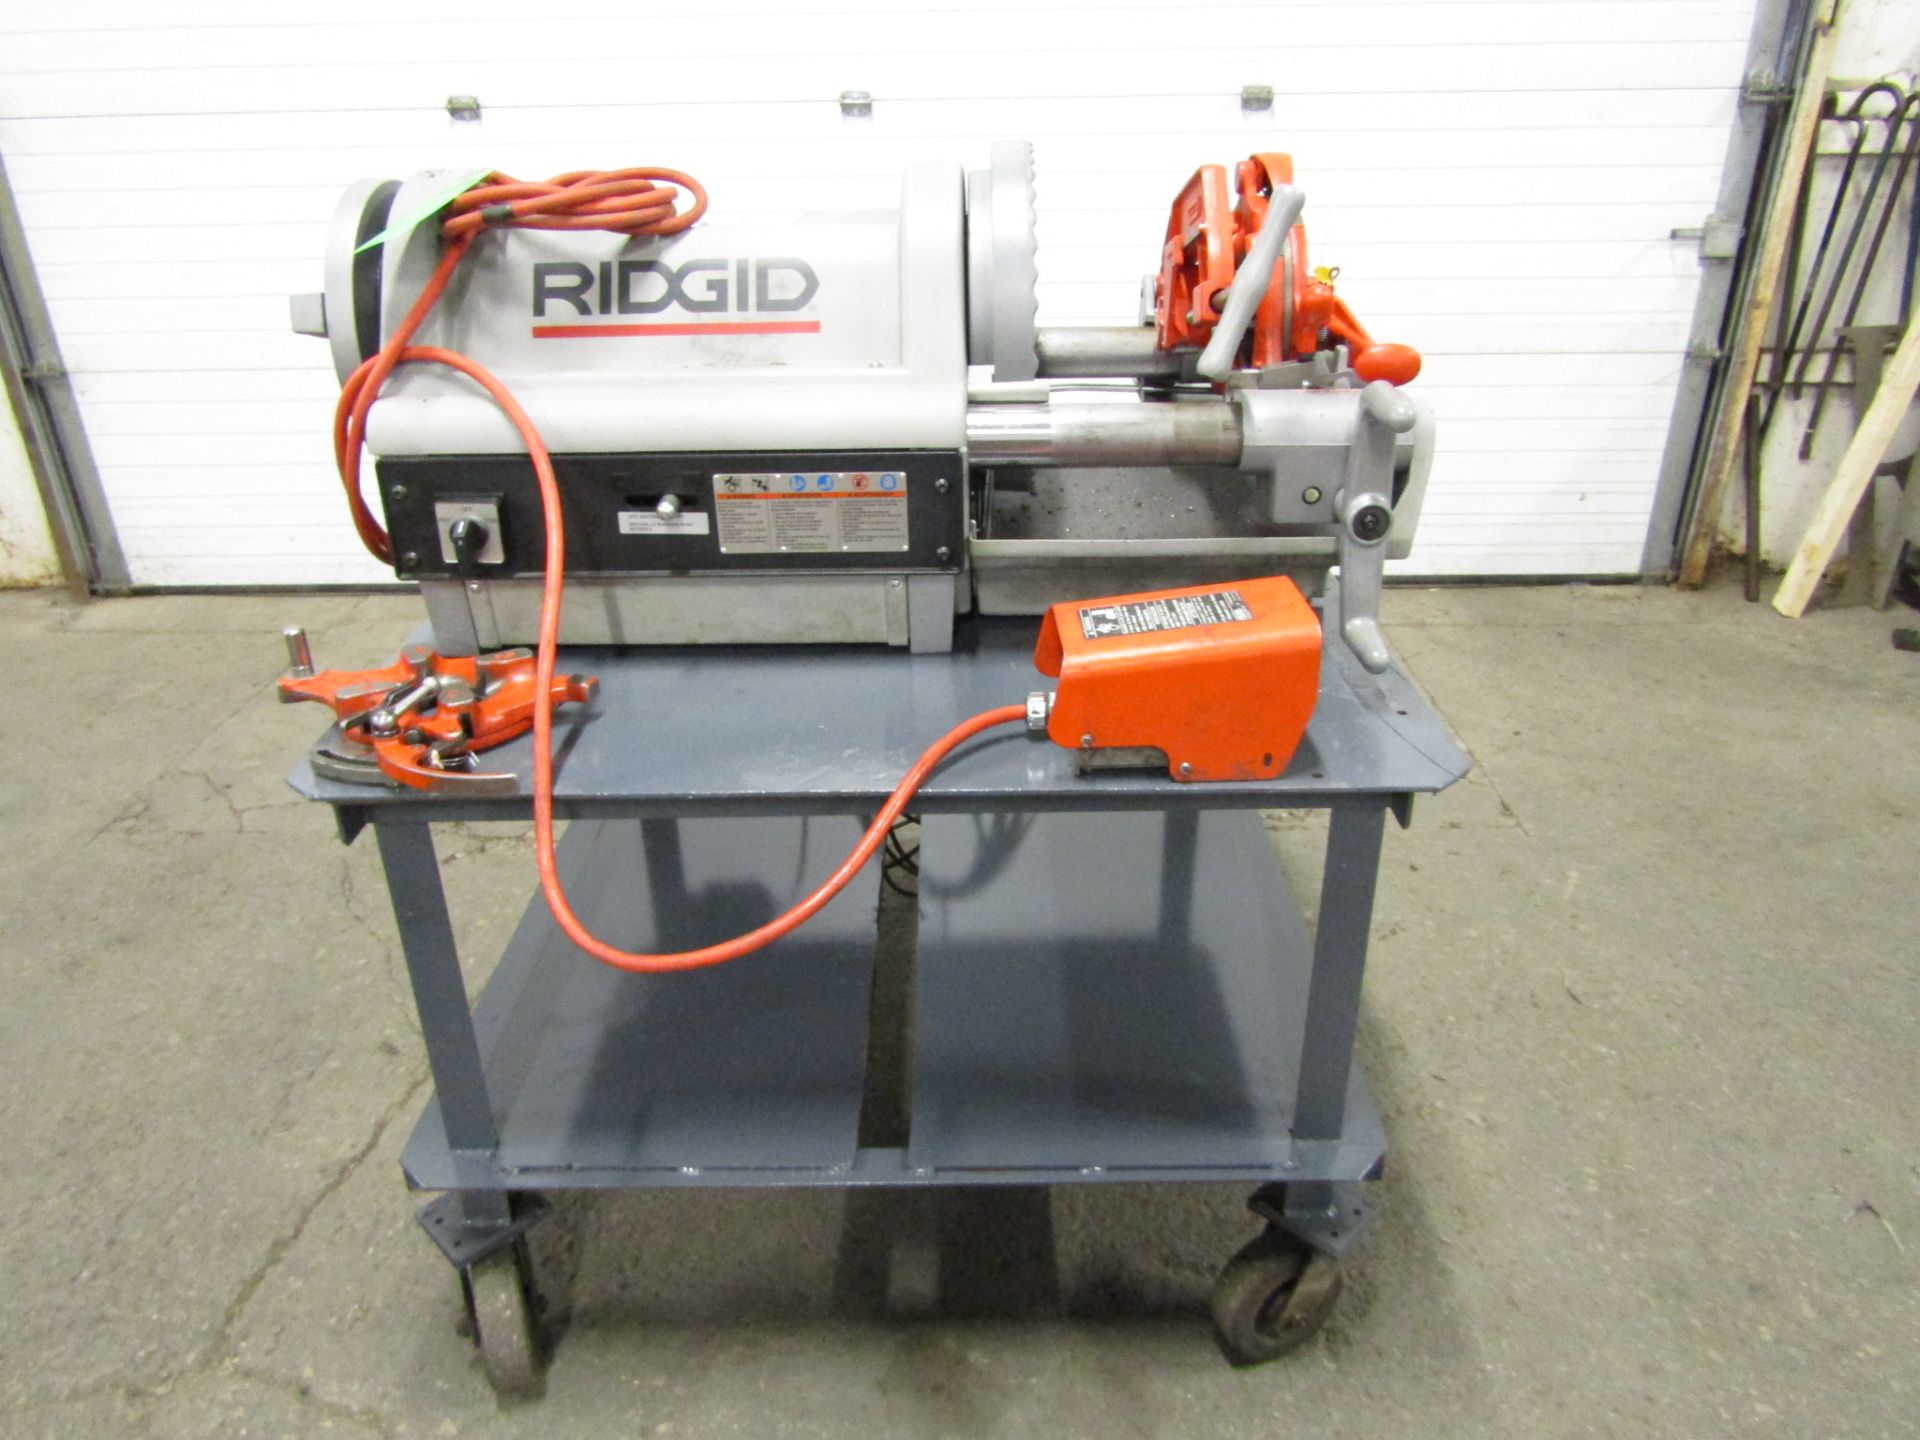 Ridgid 1224 Pipe Threader with 1/8" to 4" capacity w dies - complete like new with cutter die reamer